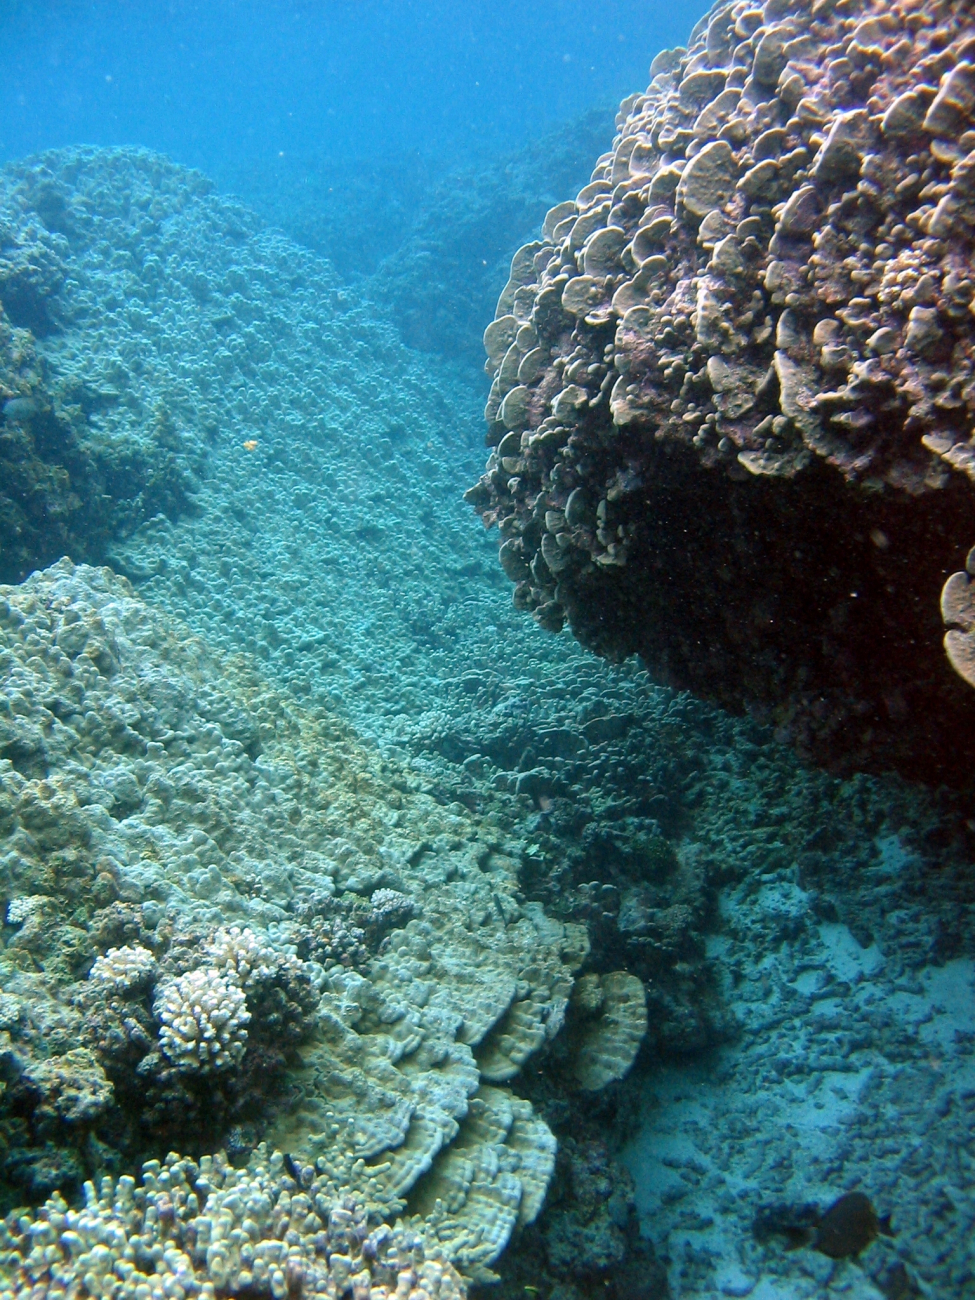 A reef scene with Pavona duerdeni on right